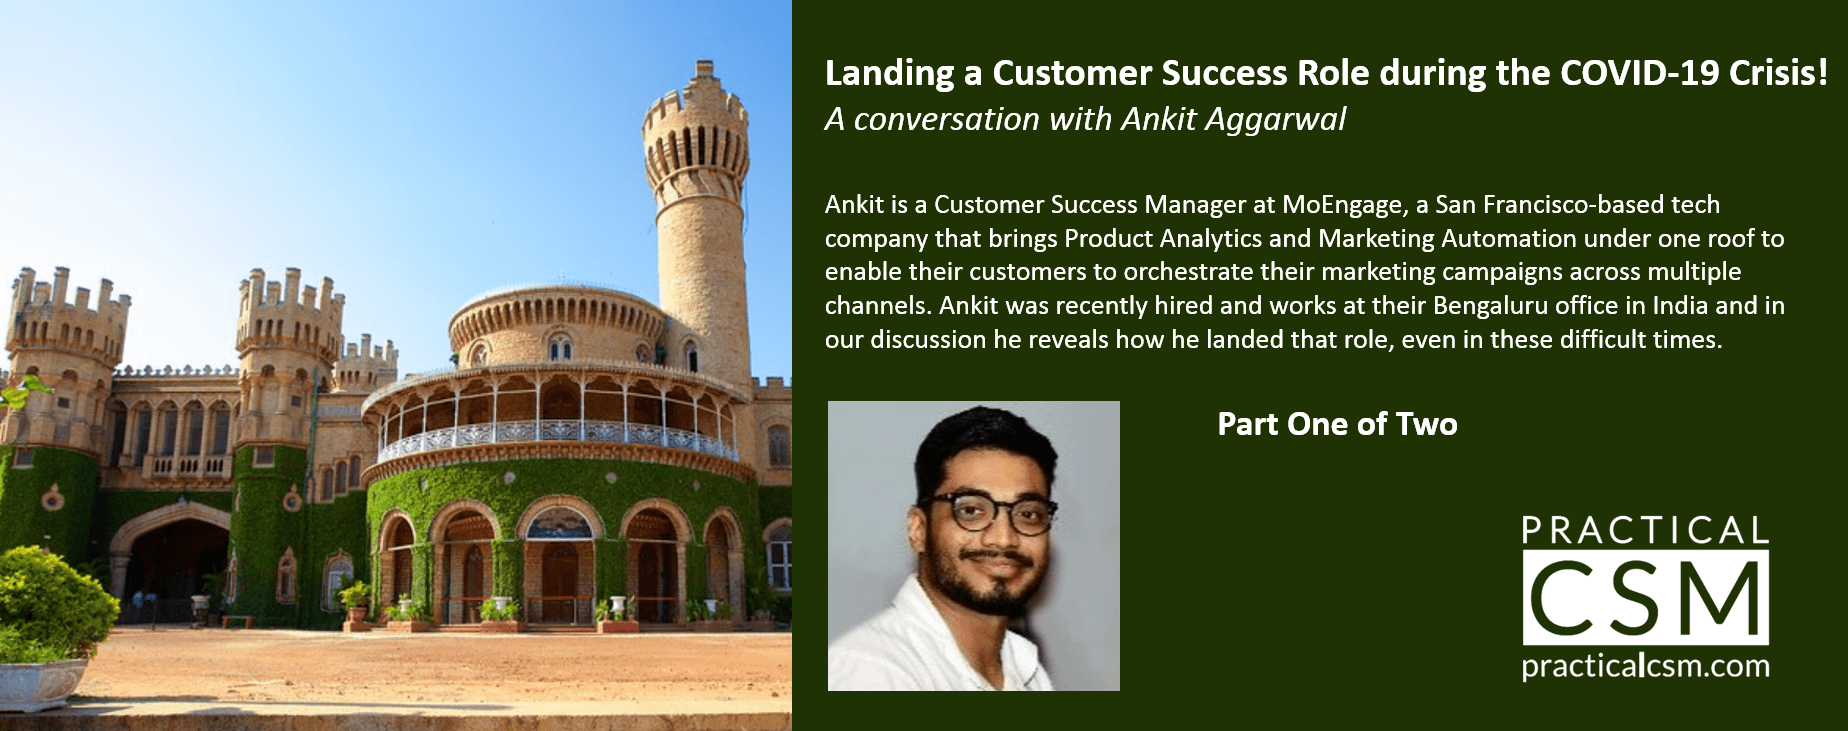 Practical CSM Landing a Customer Success role during the COVID-19 Crisis with Ankit Aggarwal part 1